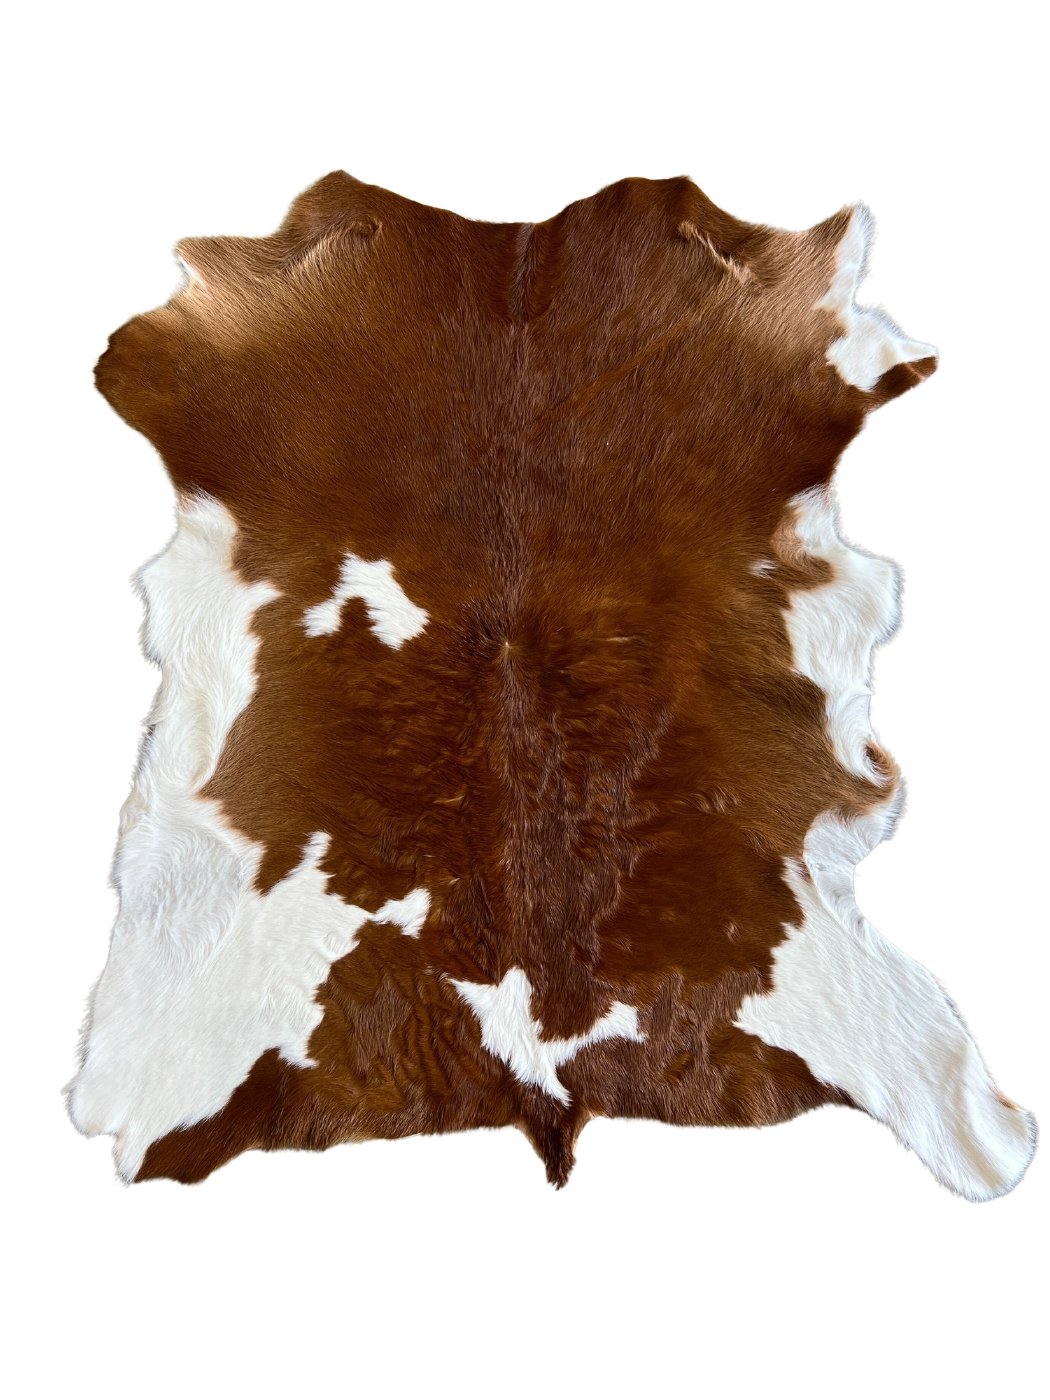 Calf Hide - Brown and White - Hides & Leather Store - By Trahide - Calf Hide